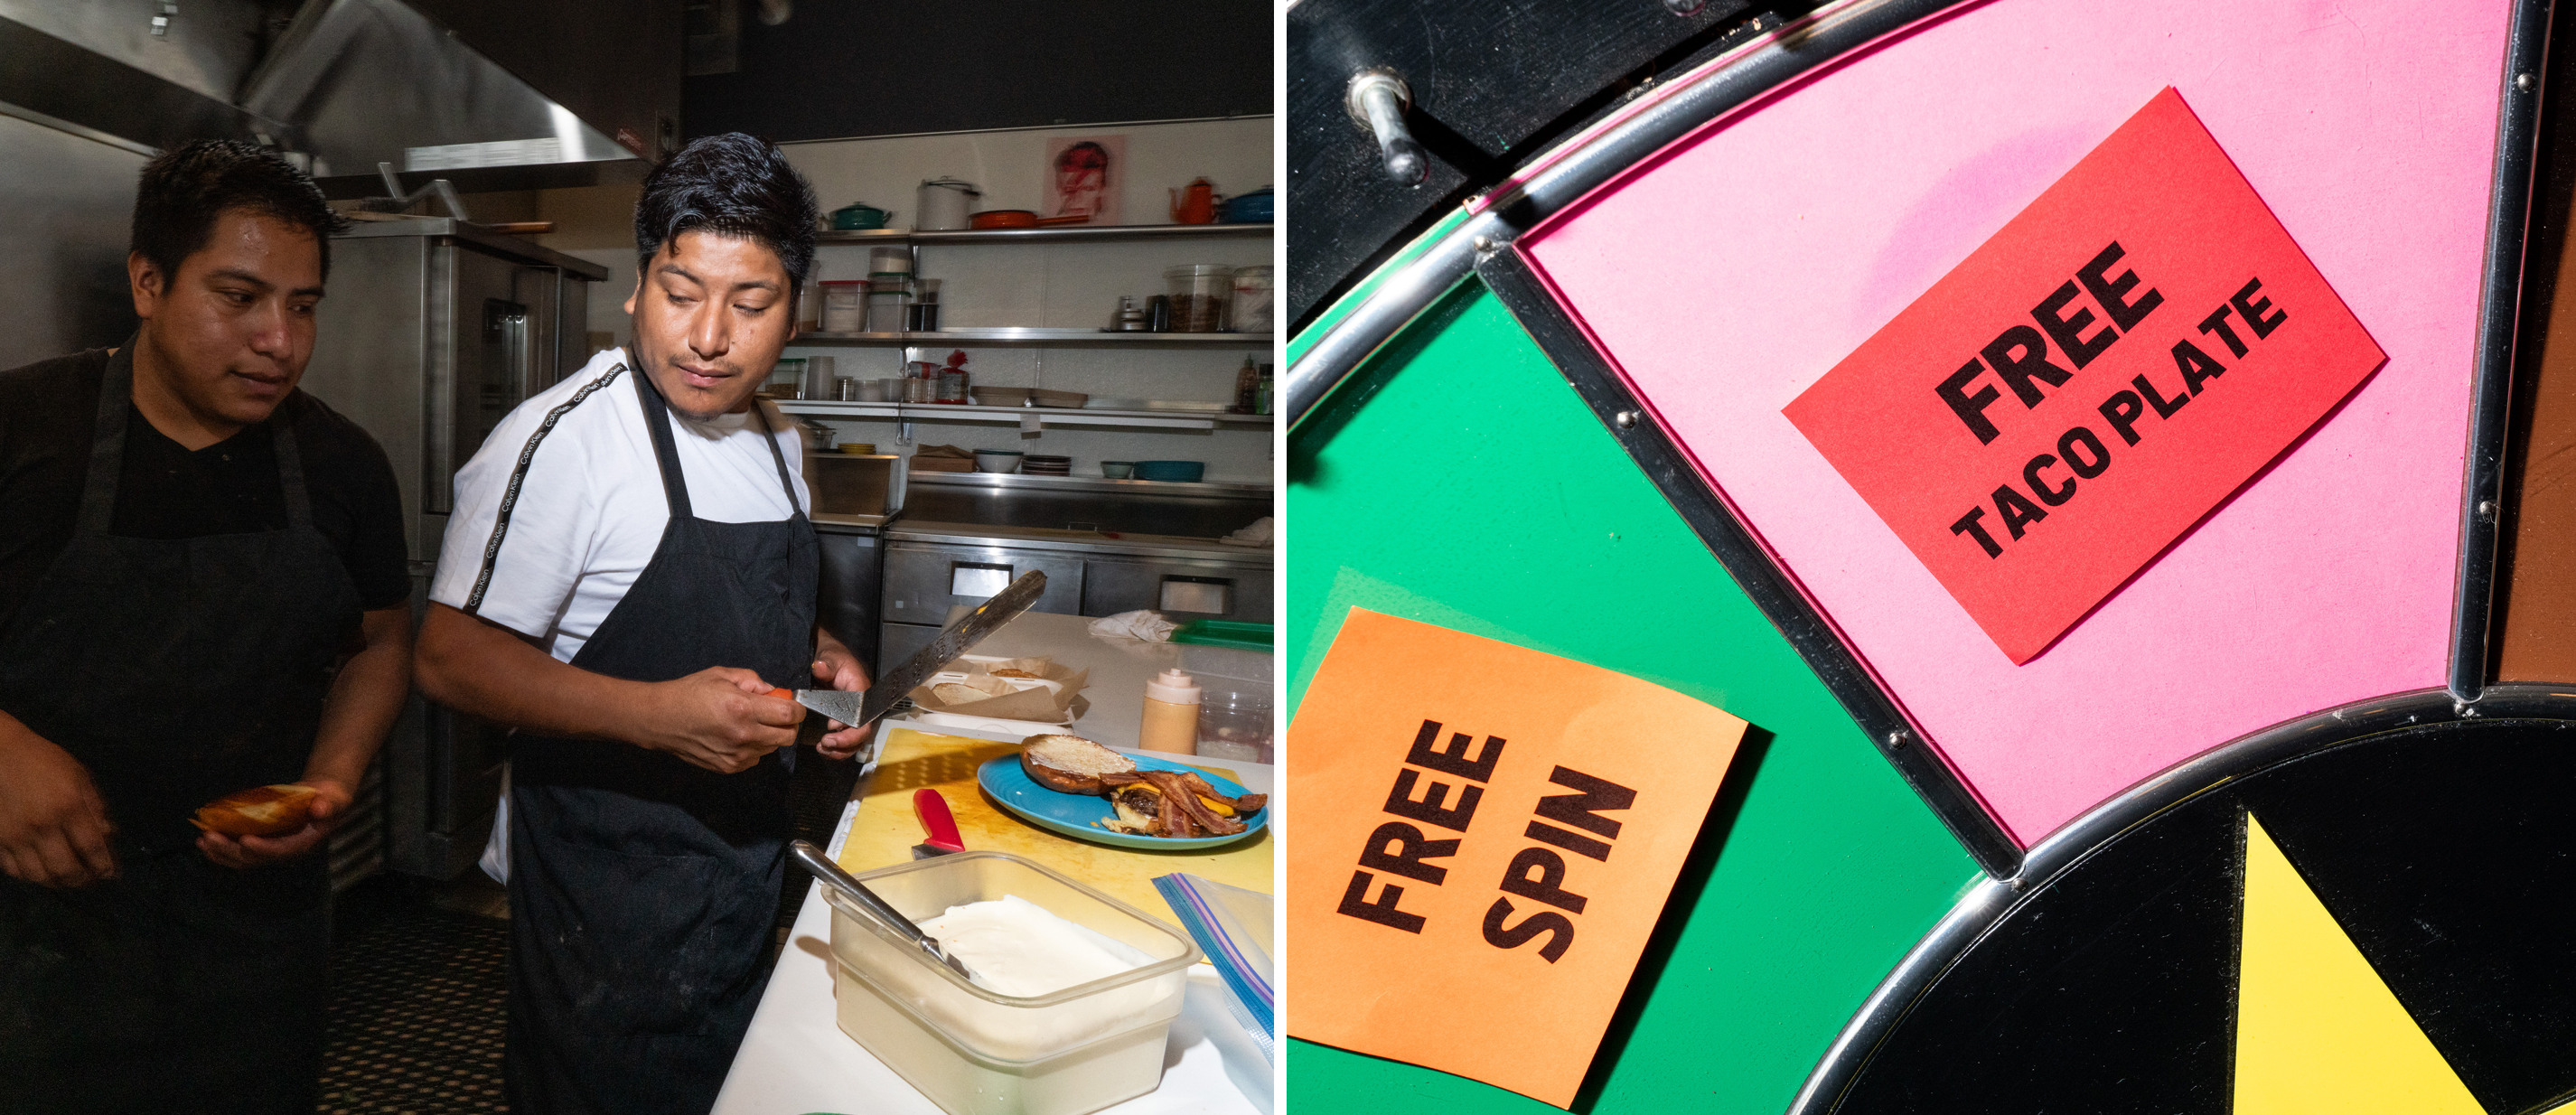 Two chefs work in a kitchen; a prize wheel offers a free taco plate and a free spin.